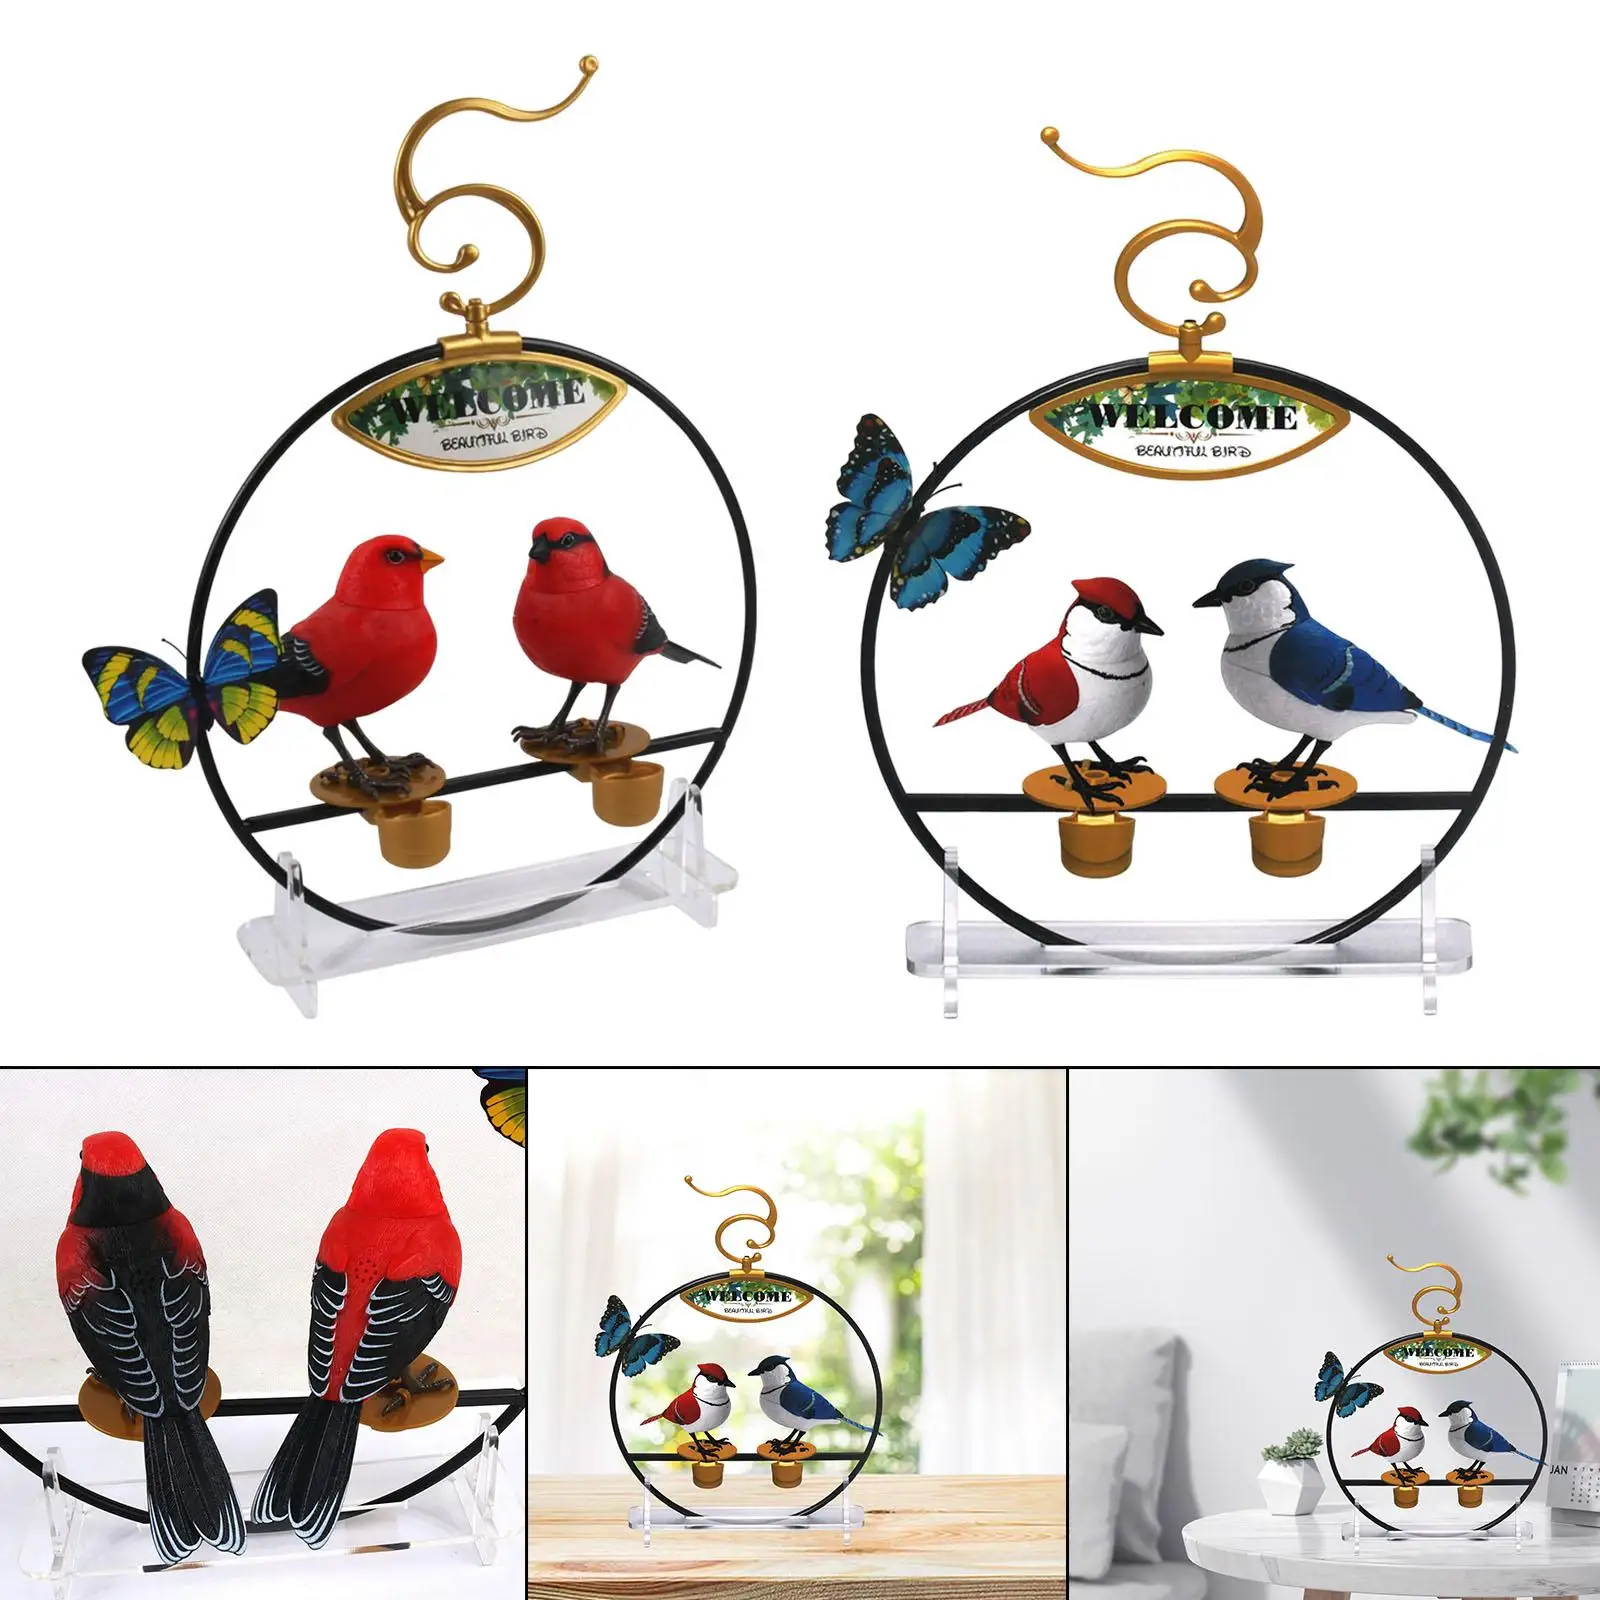 Adorable Singing Chirping Dancing Parrots Birds with Sound Sensor Chirping Dancing Parrots Bird Kids Toy Gift Home Decoration